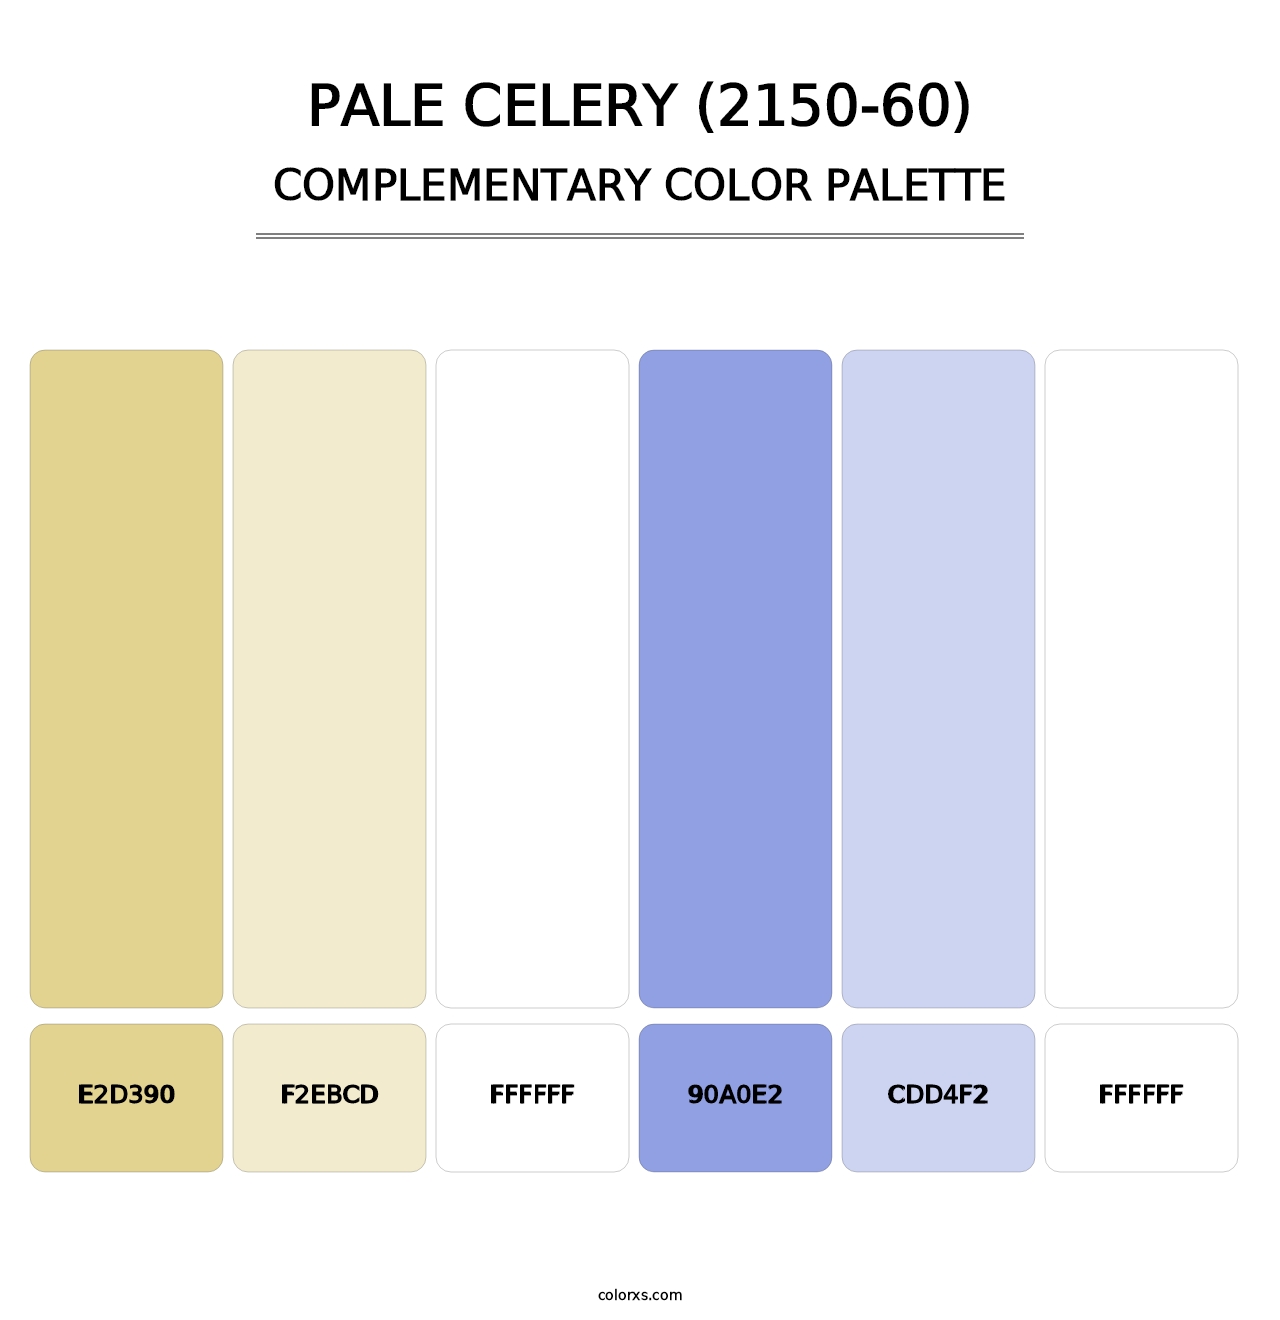 Pale Celery (2150-60) - Complementary Color Palette